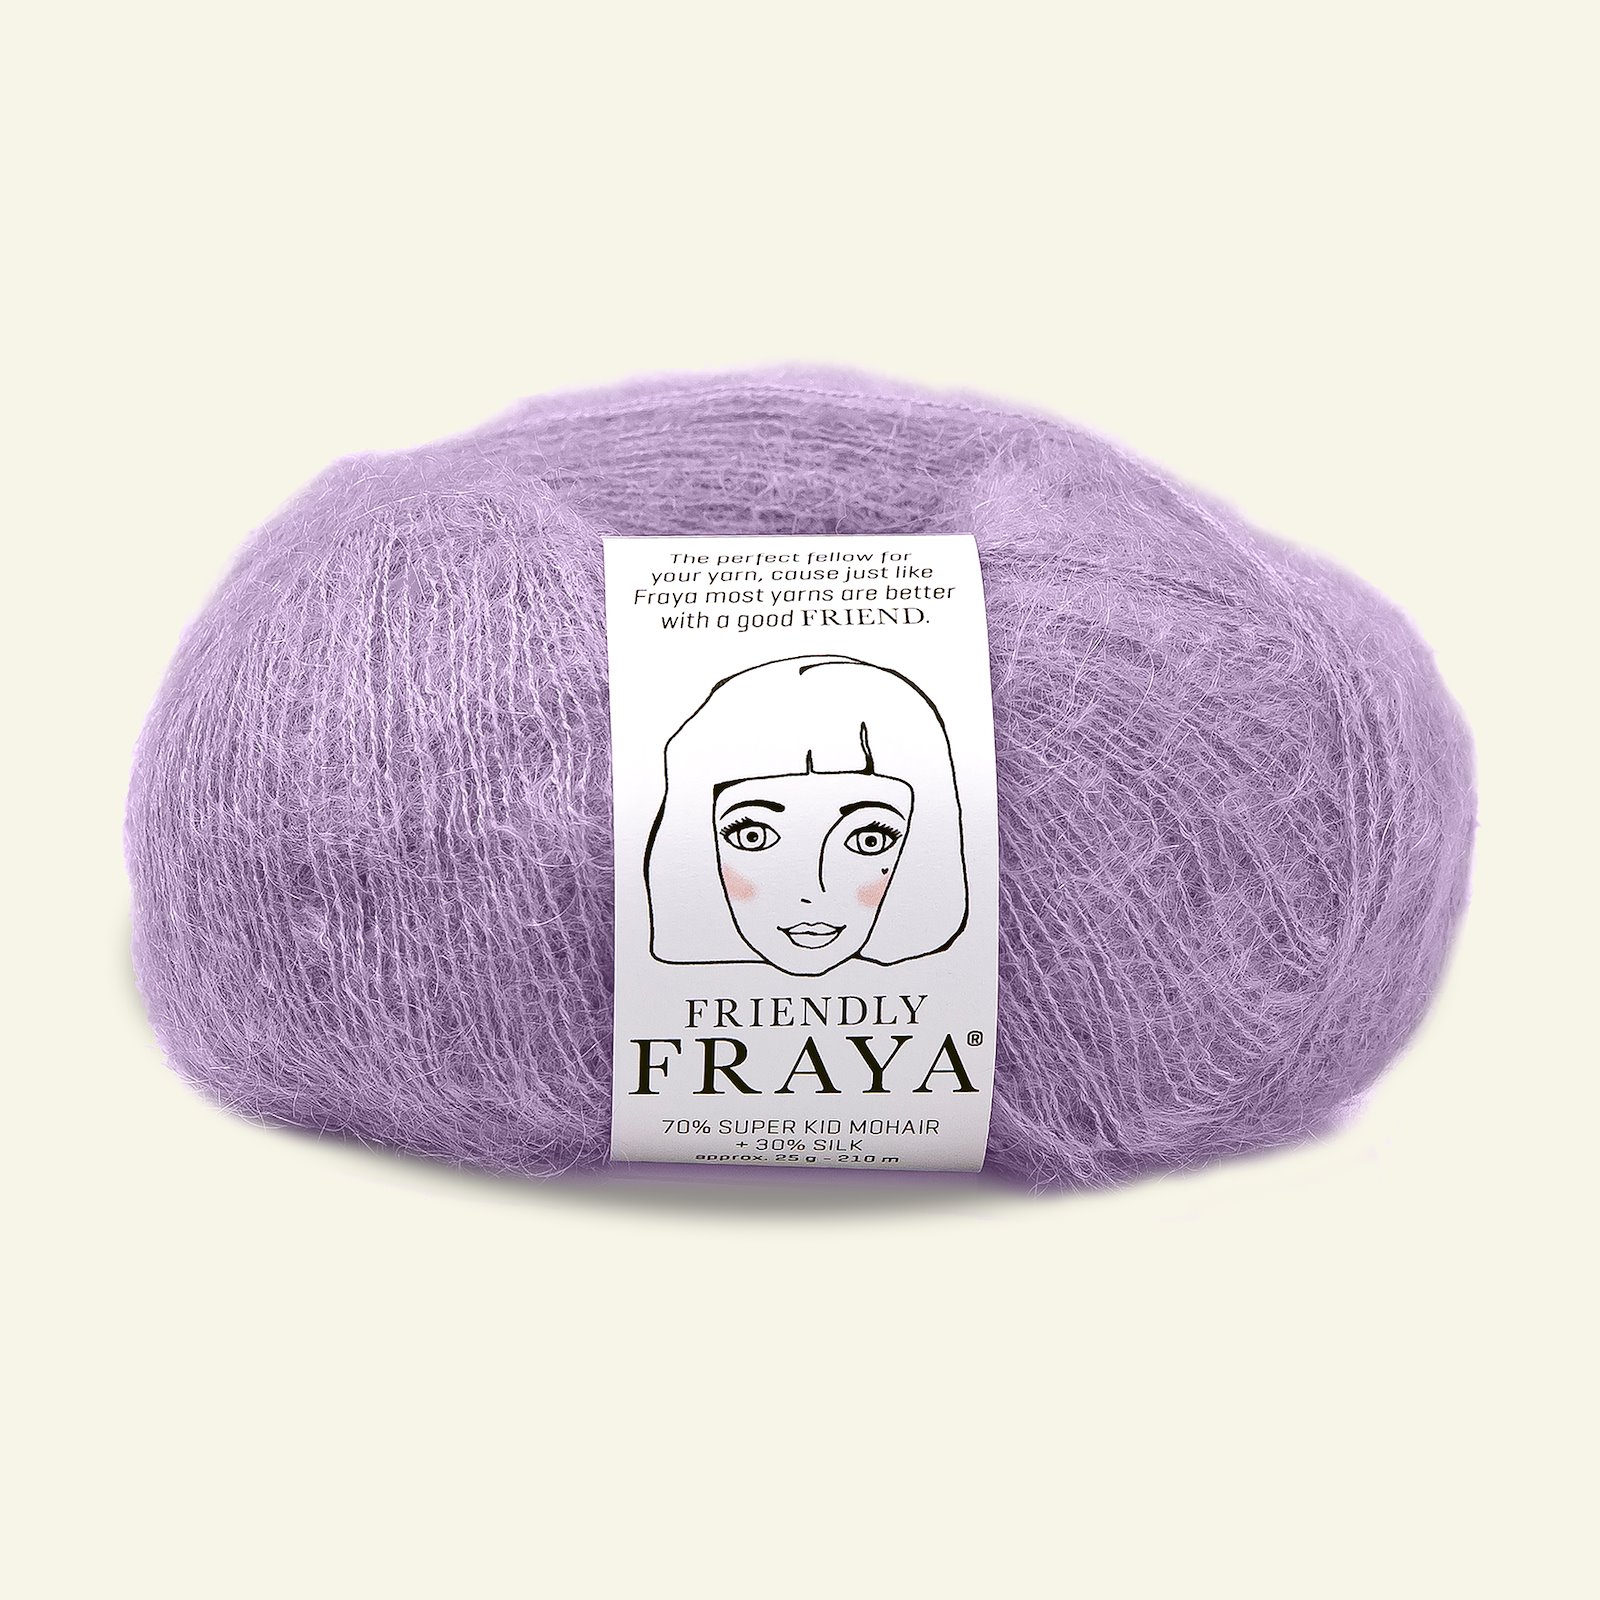 FRAYA, Wolle Seide Mohair "Friendly", hellviolet 90000916_pack